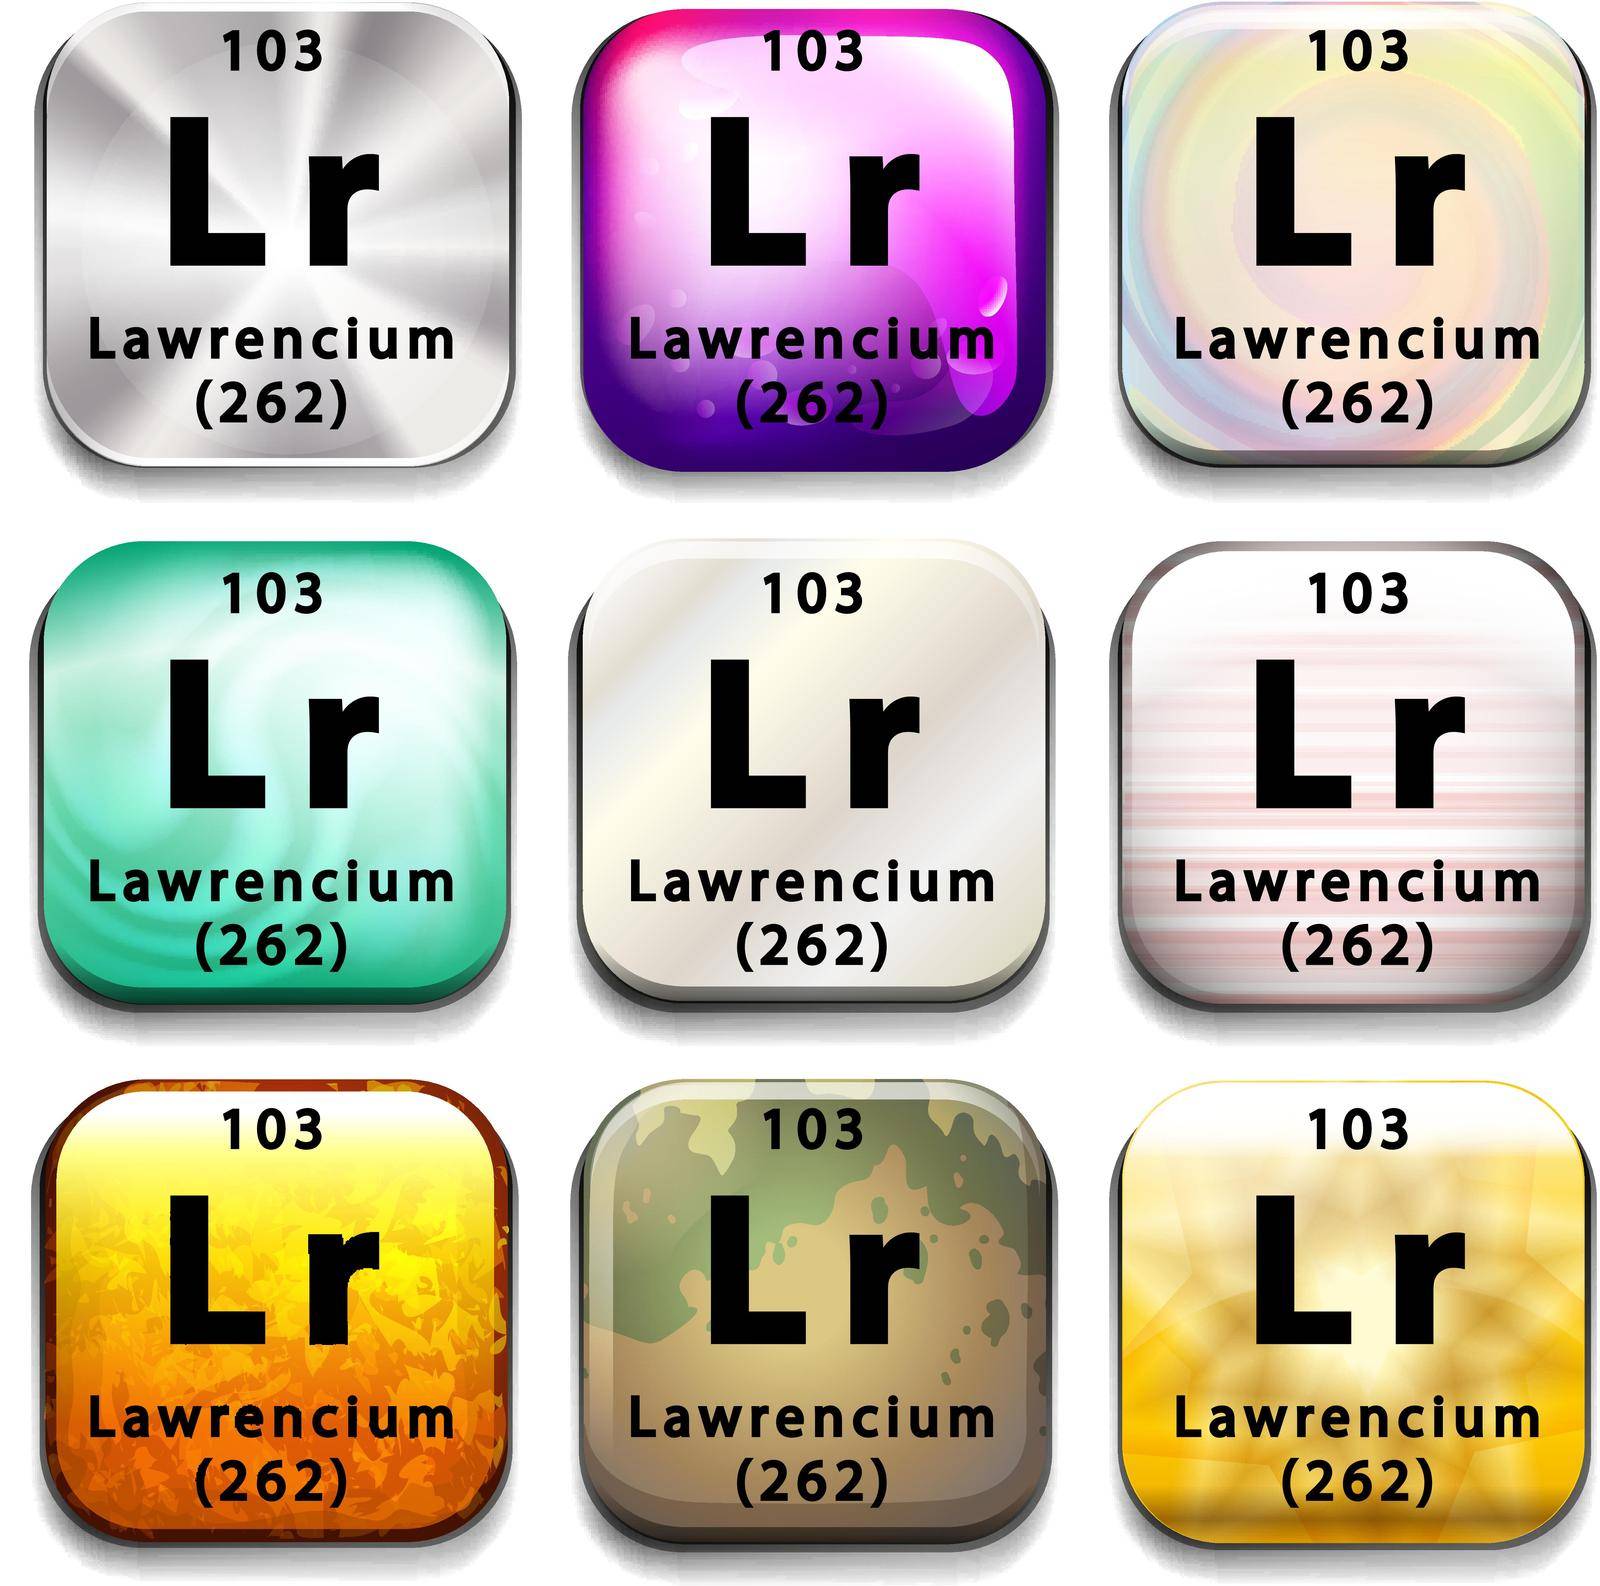 Buttons showing Lawrencium and its abbreviation on a white background